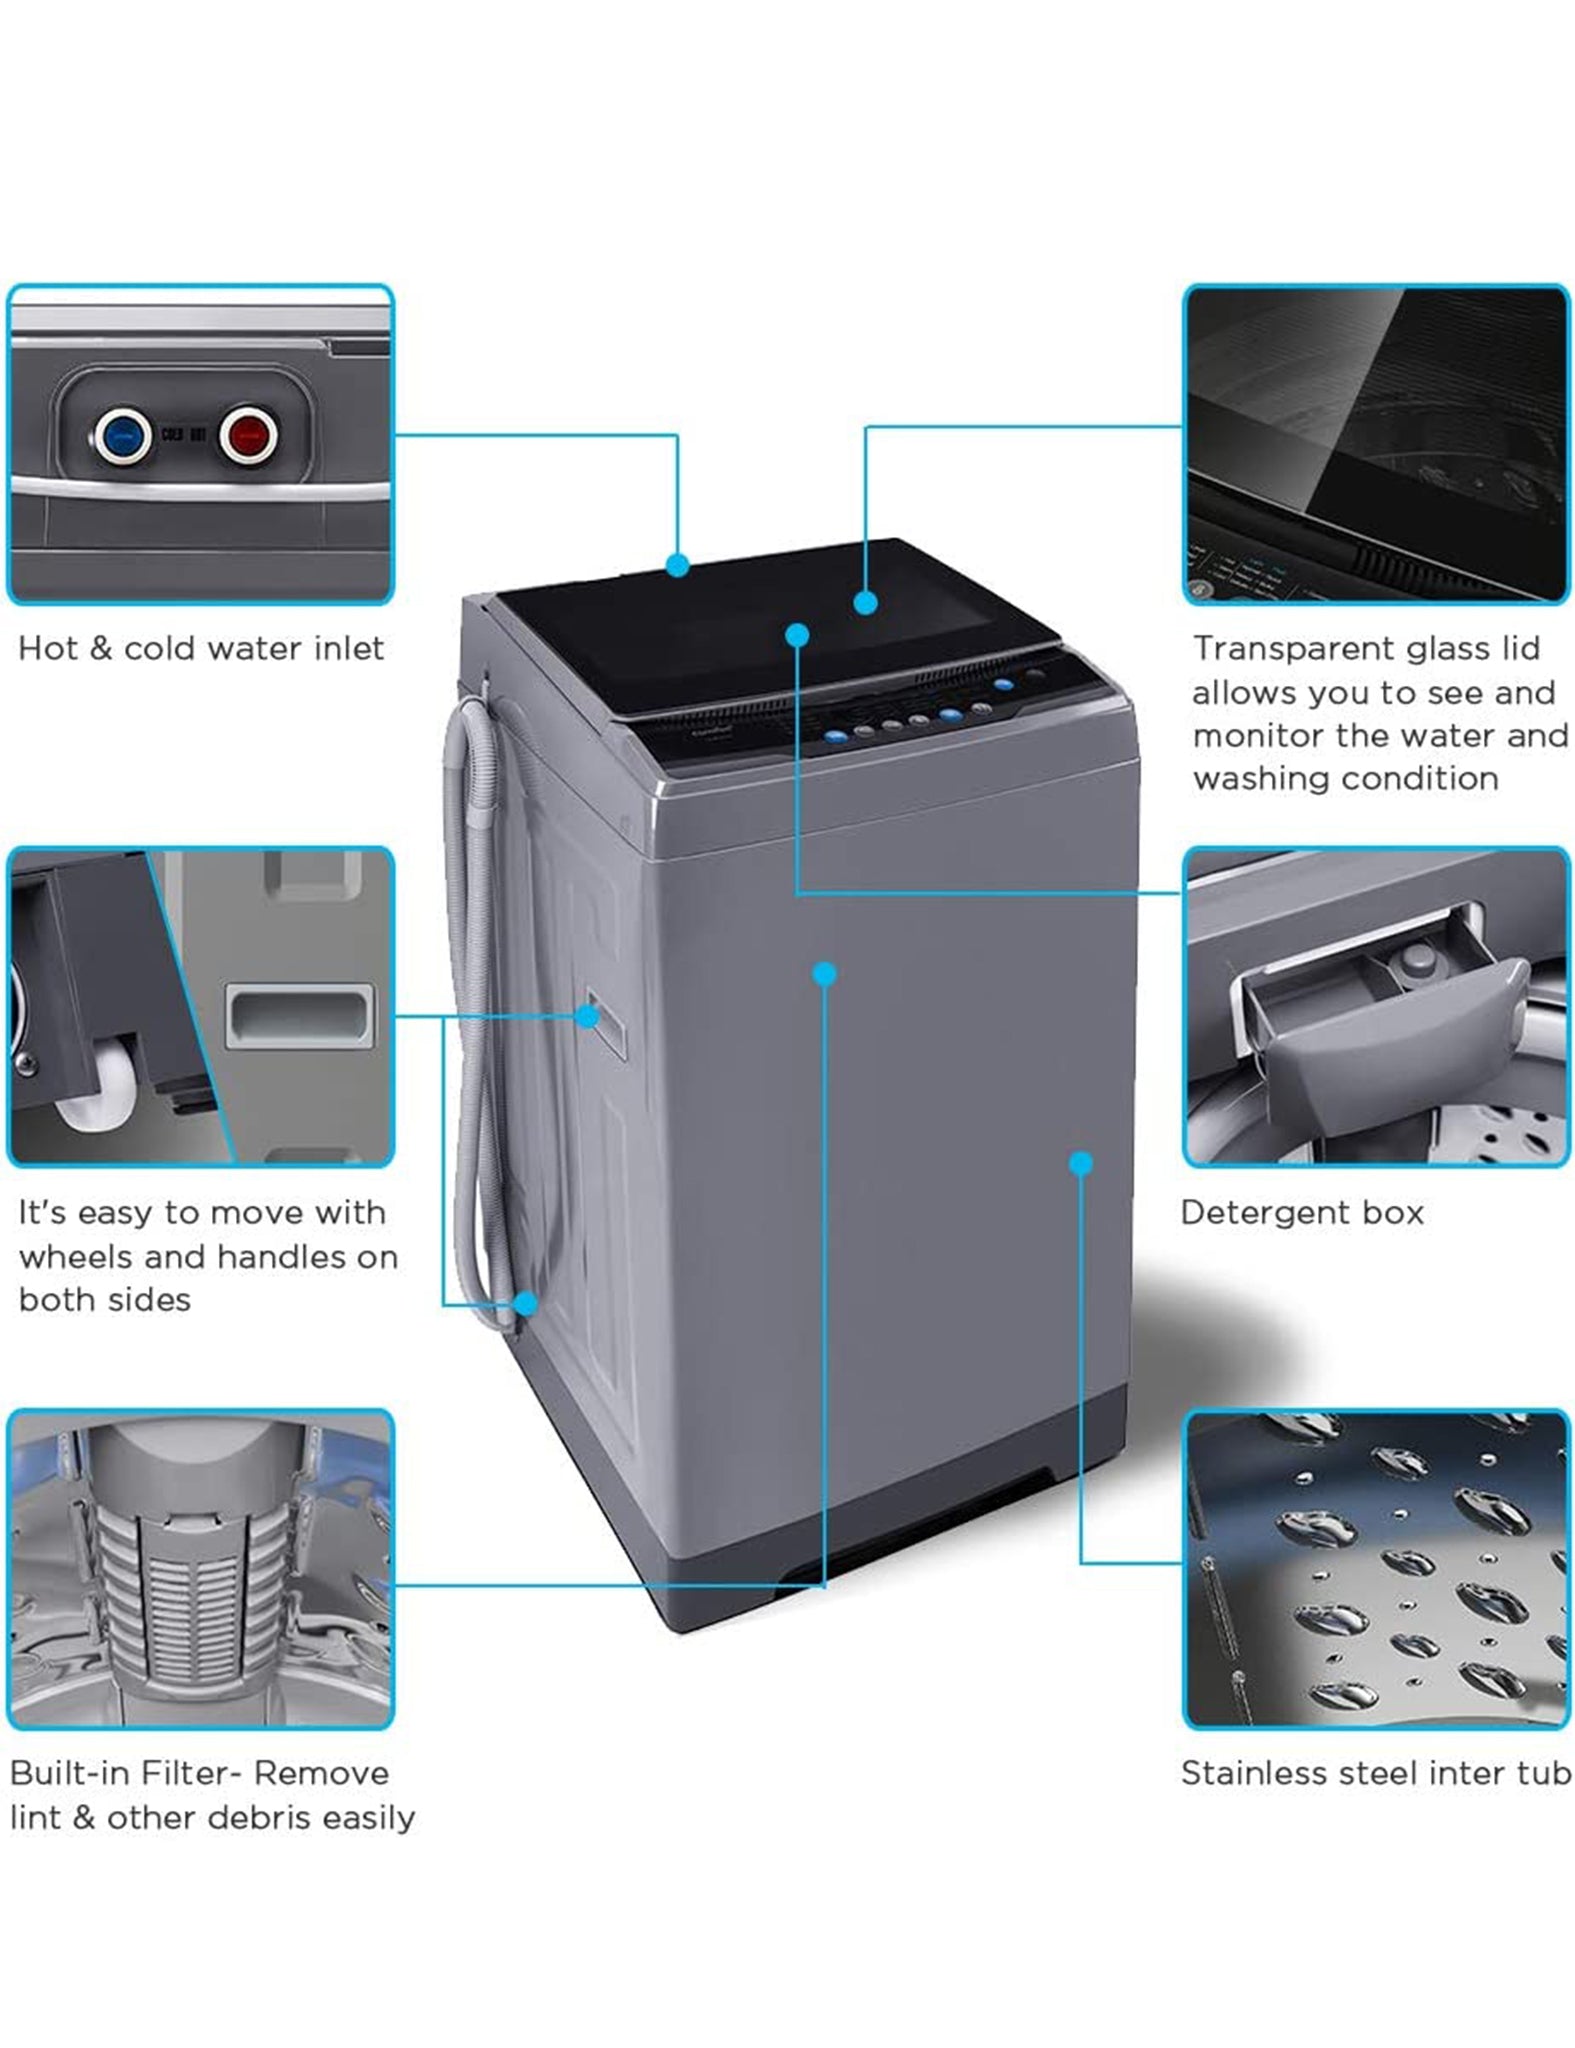 specifications of grey portable comfee washing machine